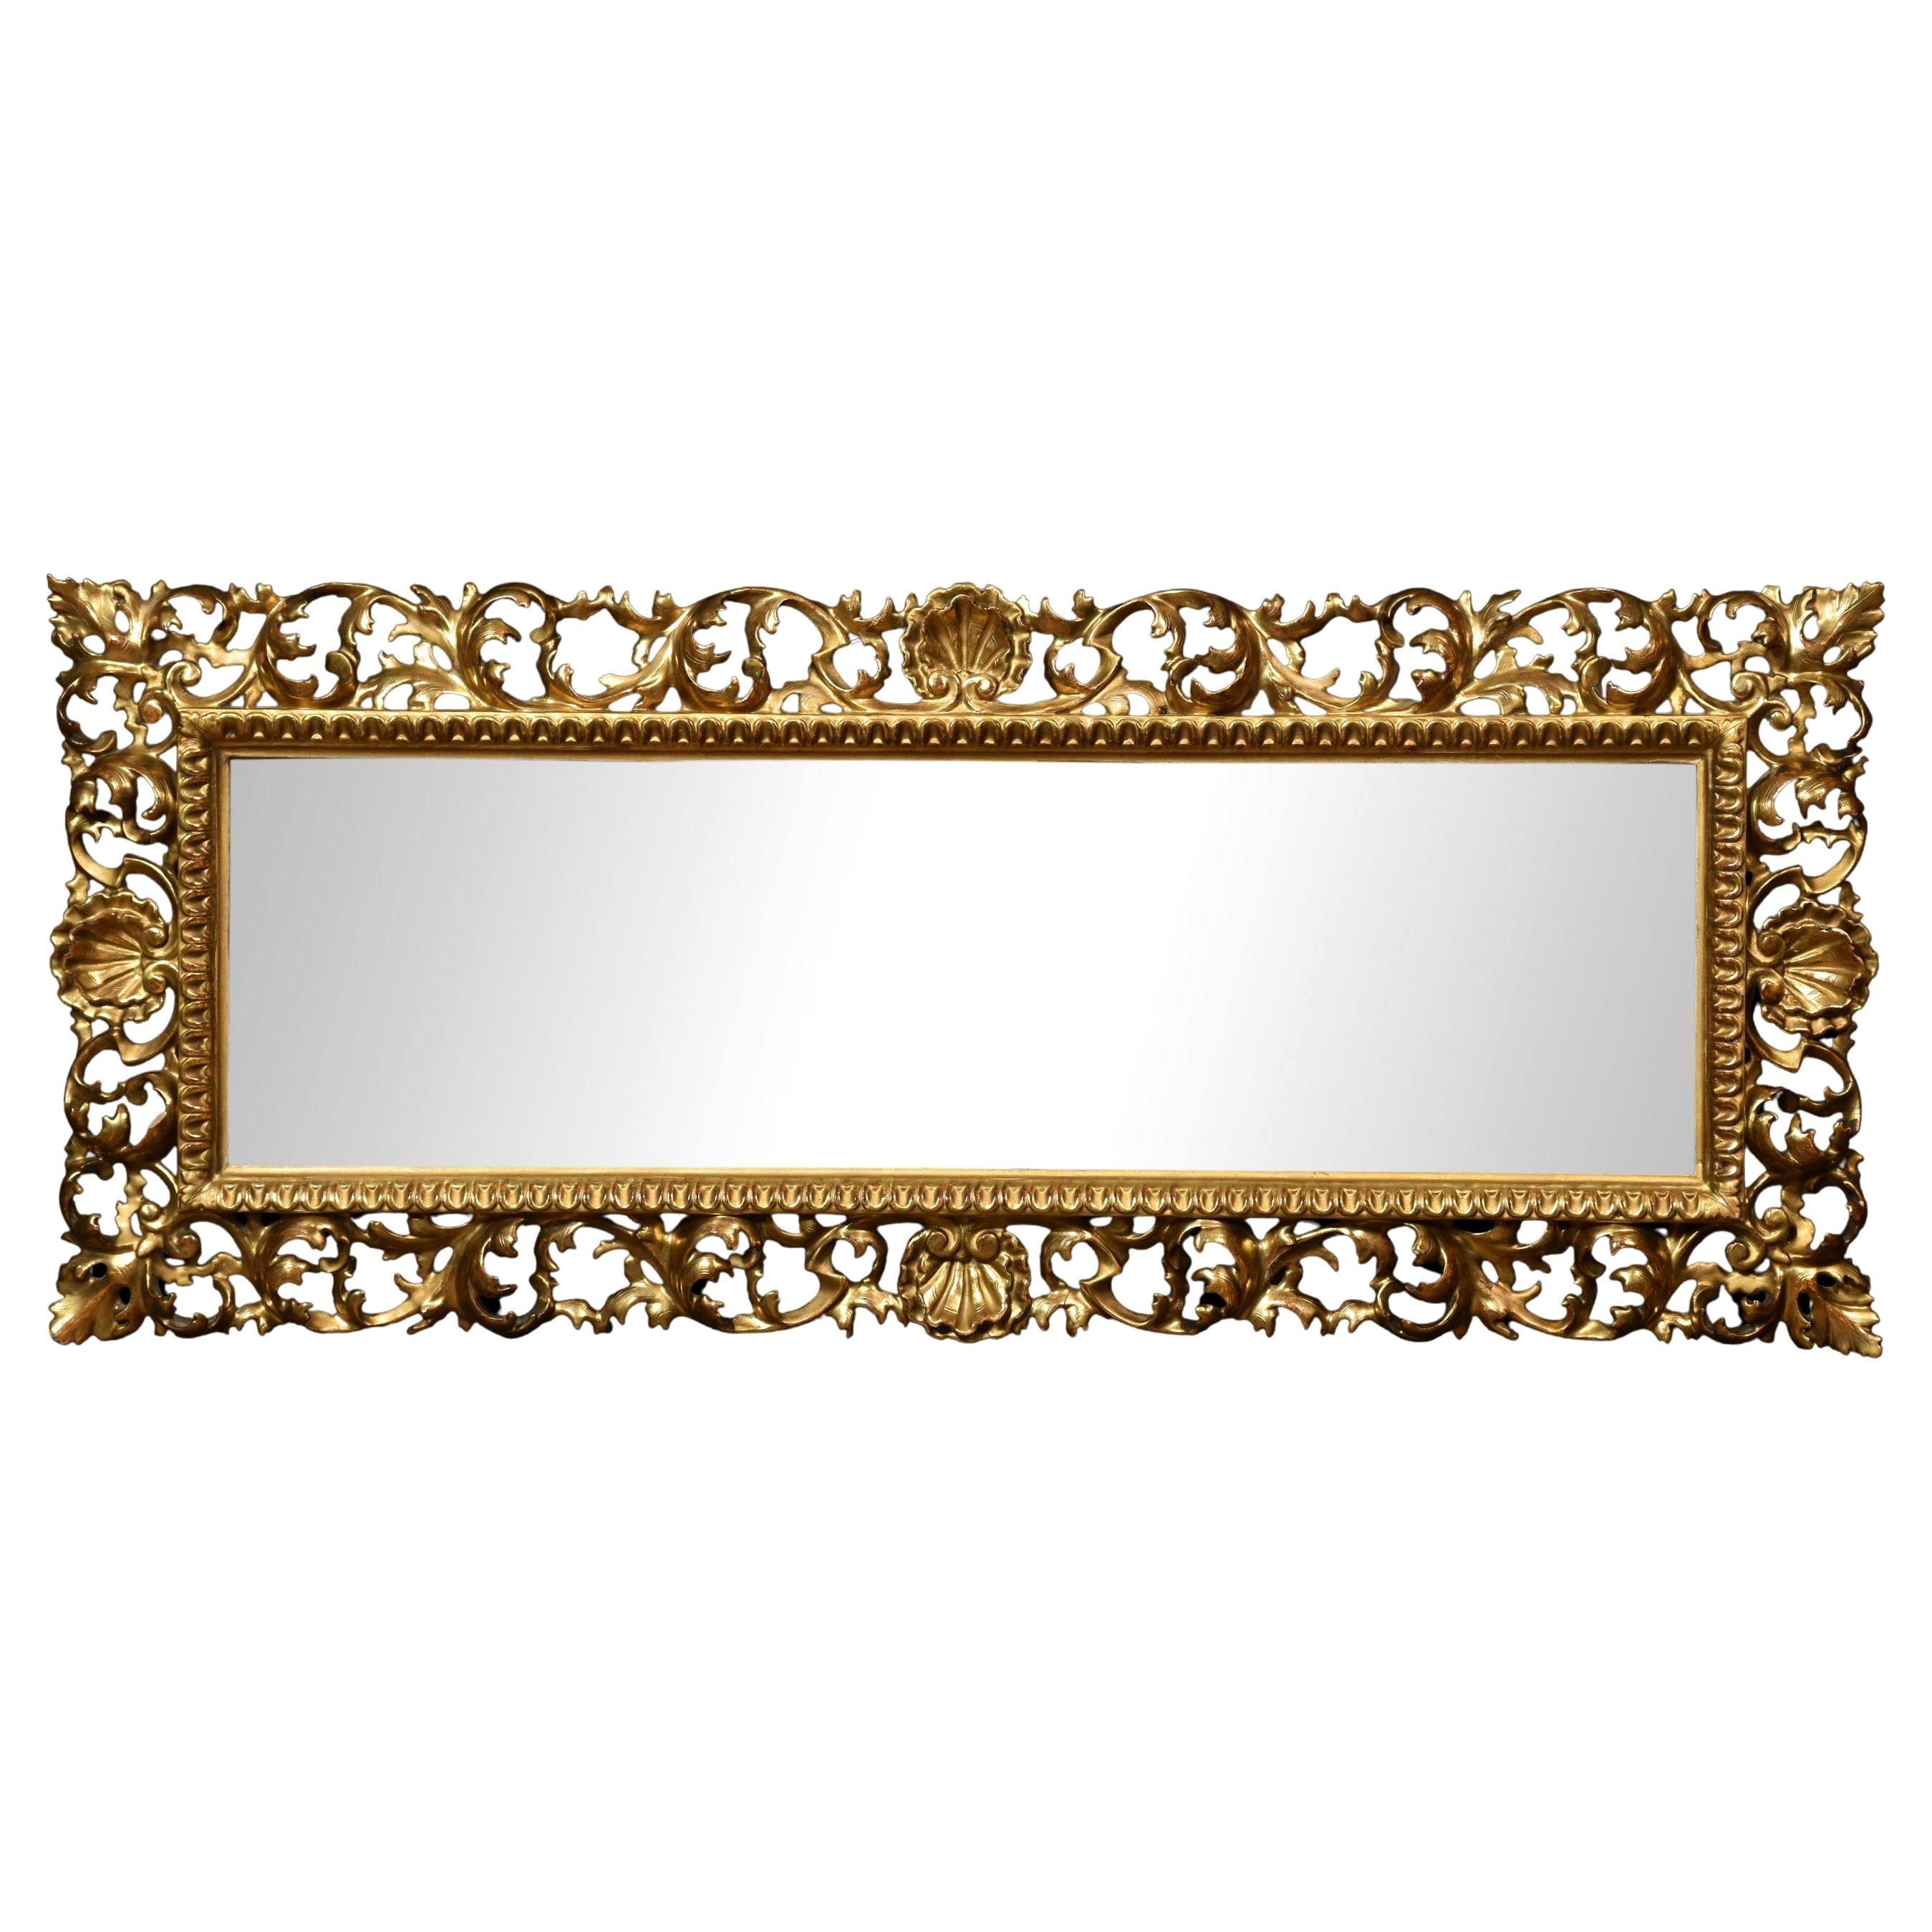 Florentine giltwood wall mirror For Sale